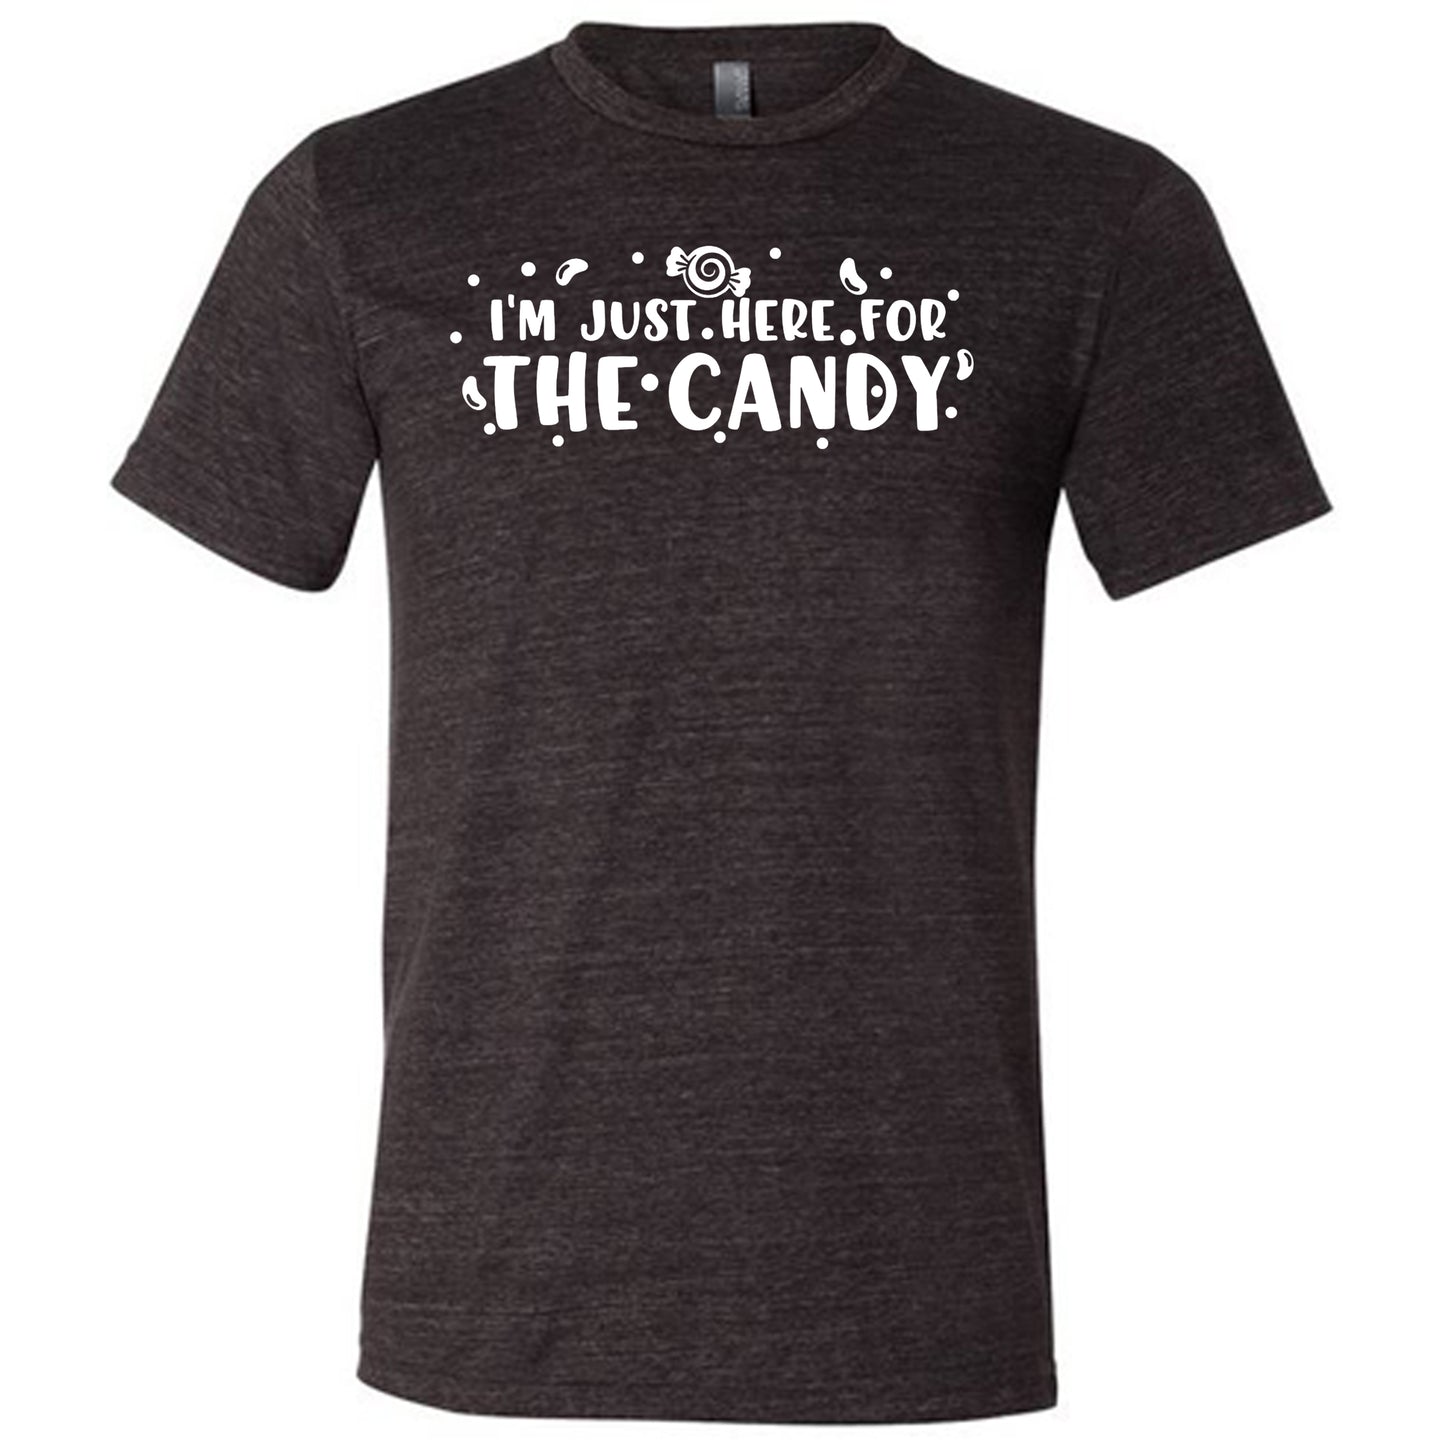 I'm Just Here for The Candy Shirt Unisex